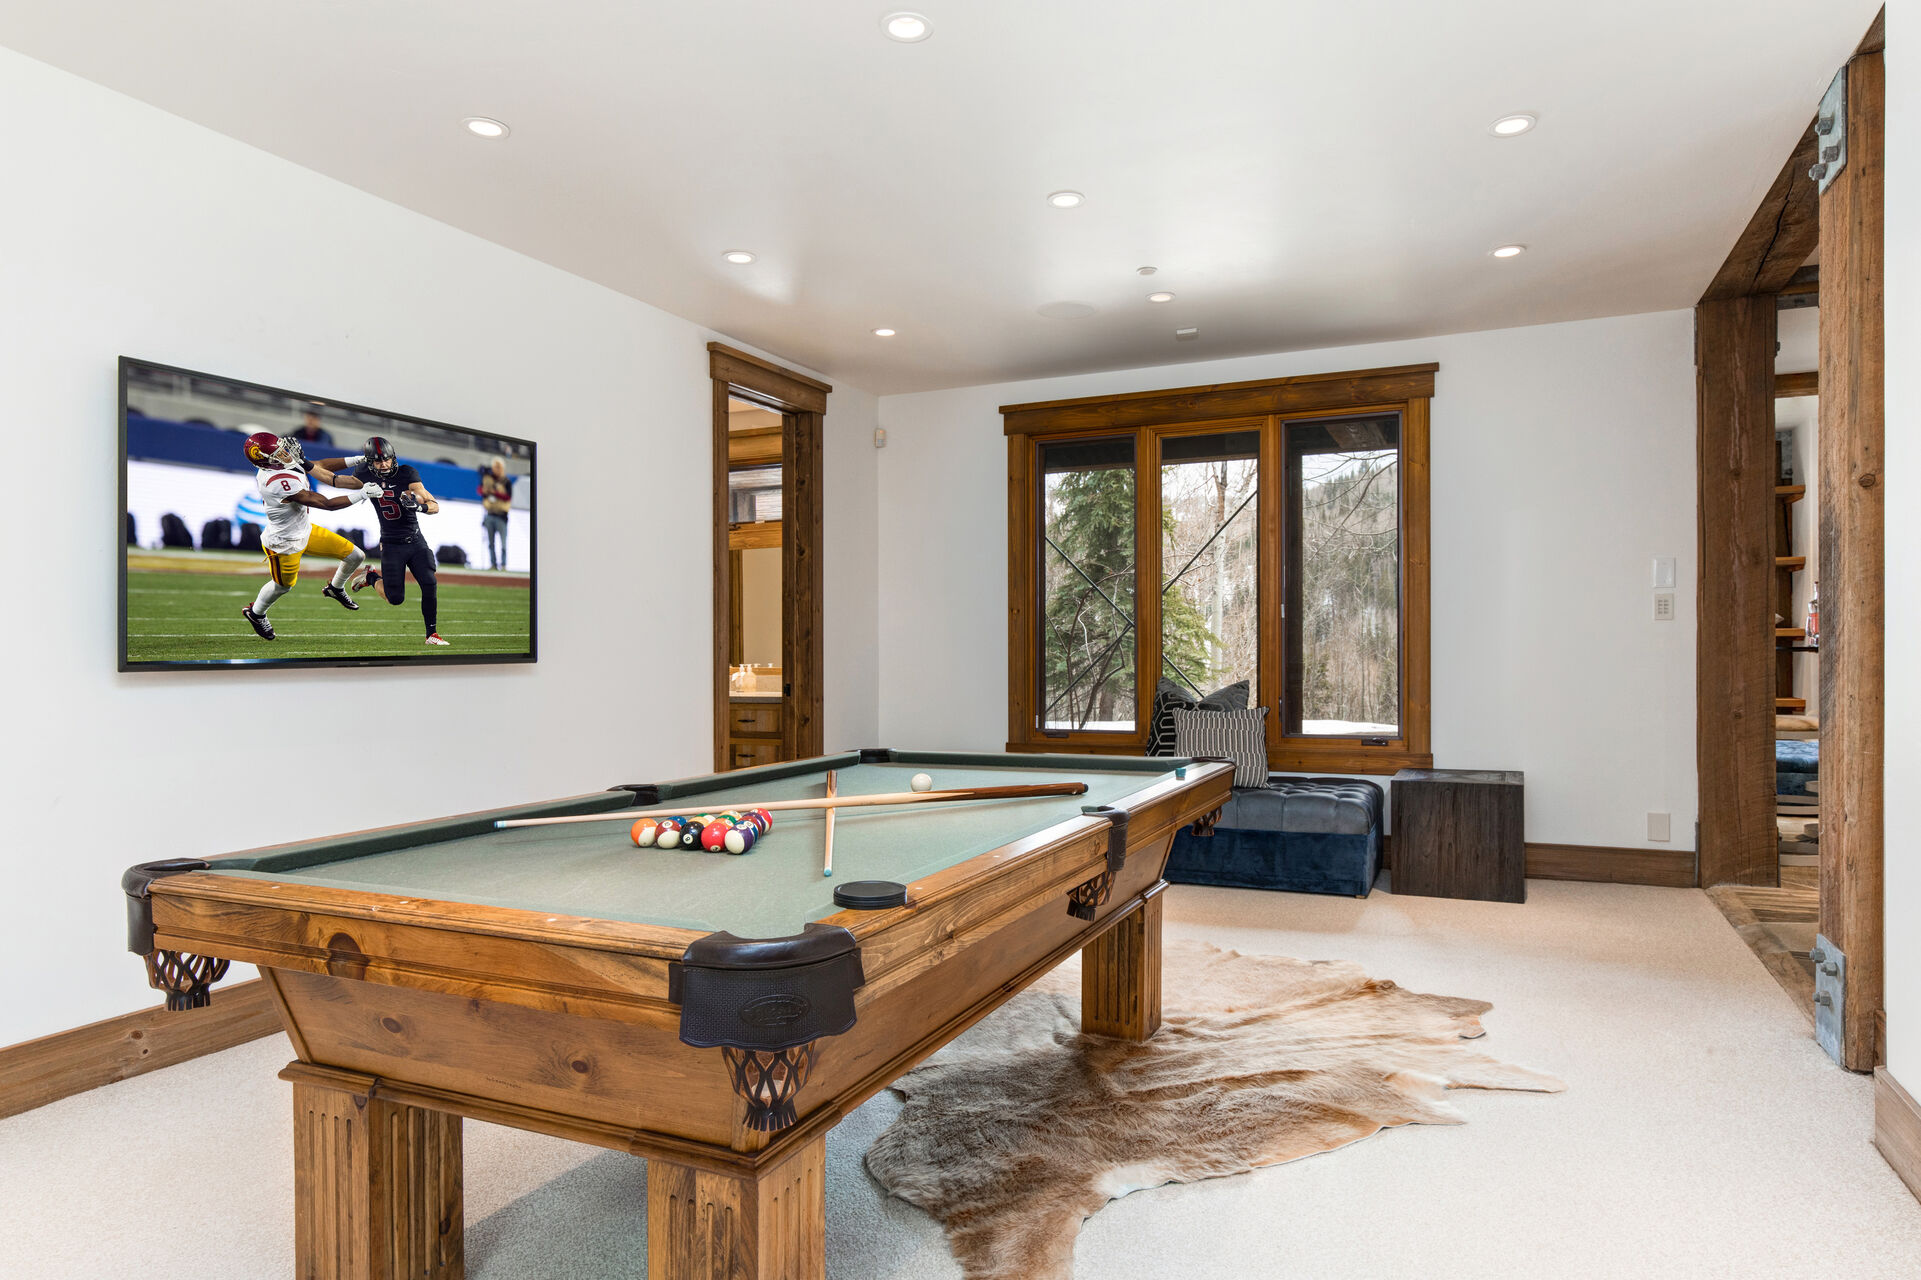 Gagrage level billiard area and access to Jack and Jill bathroom